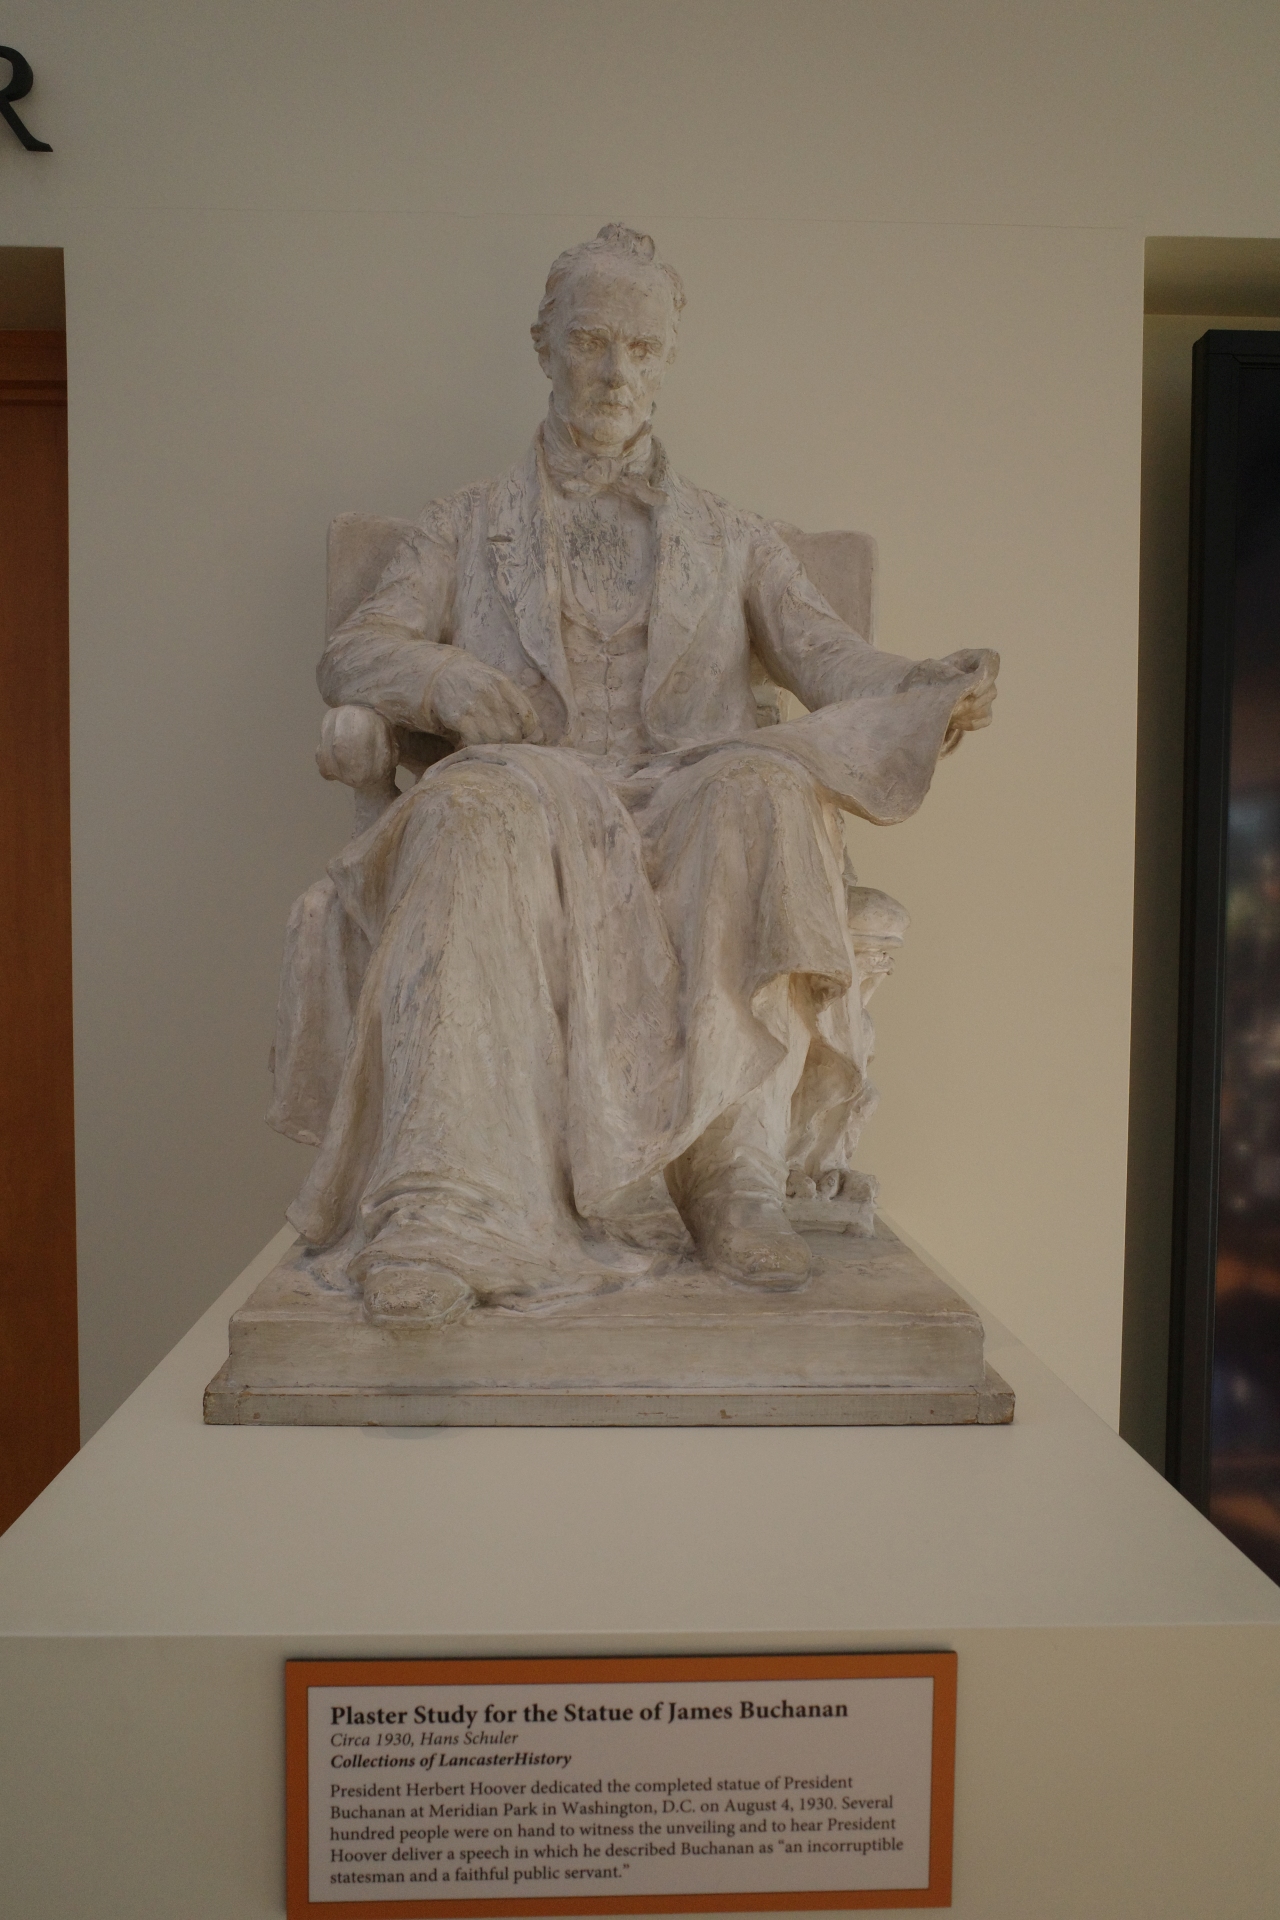 Plaster study for the James Buchanan Statue in D.C.